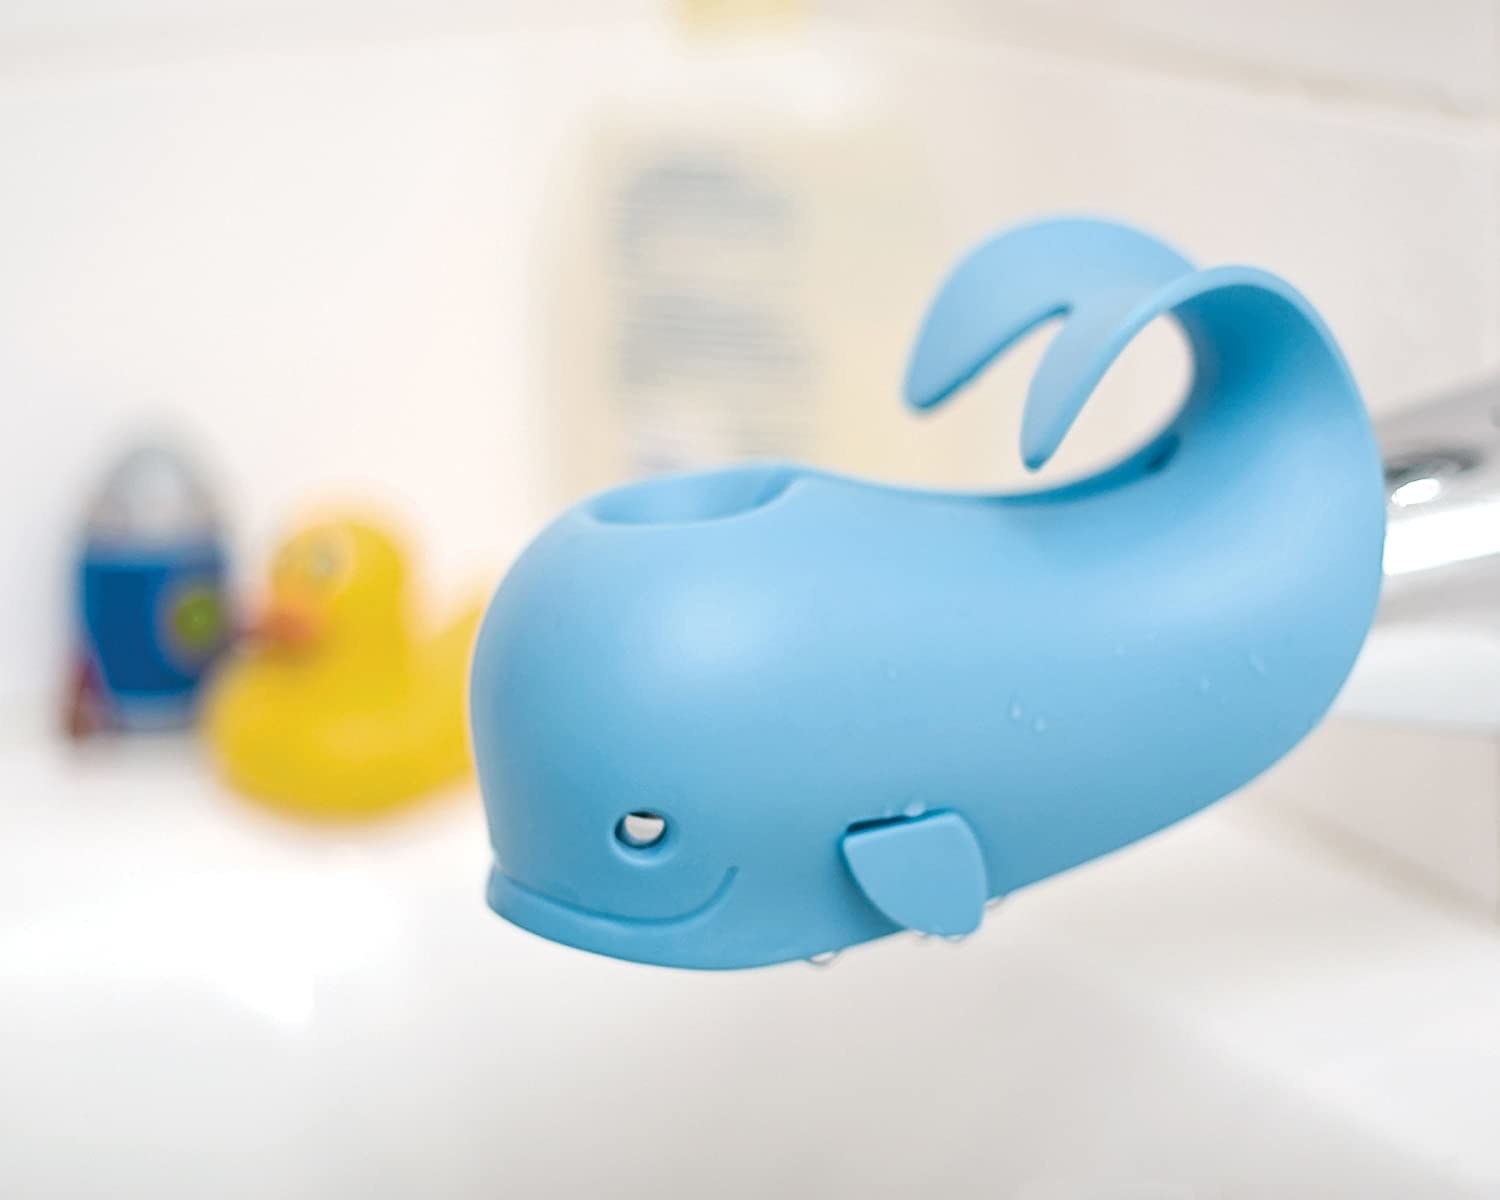 A whale shaped bath cover with a spout hole for the plug attachment